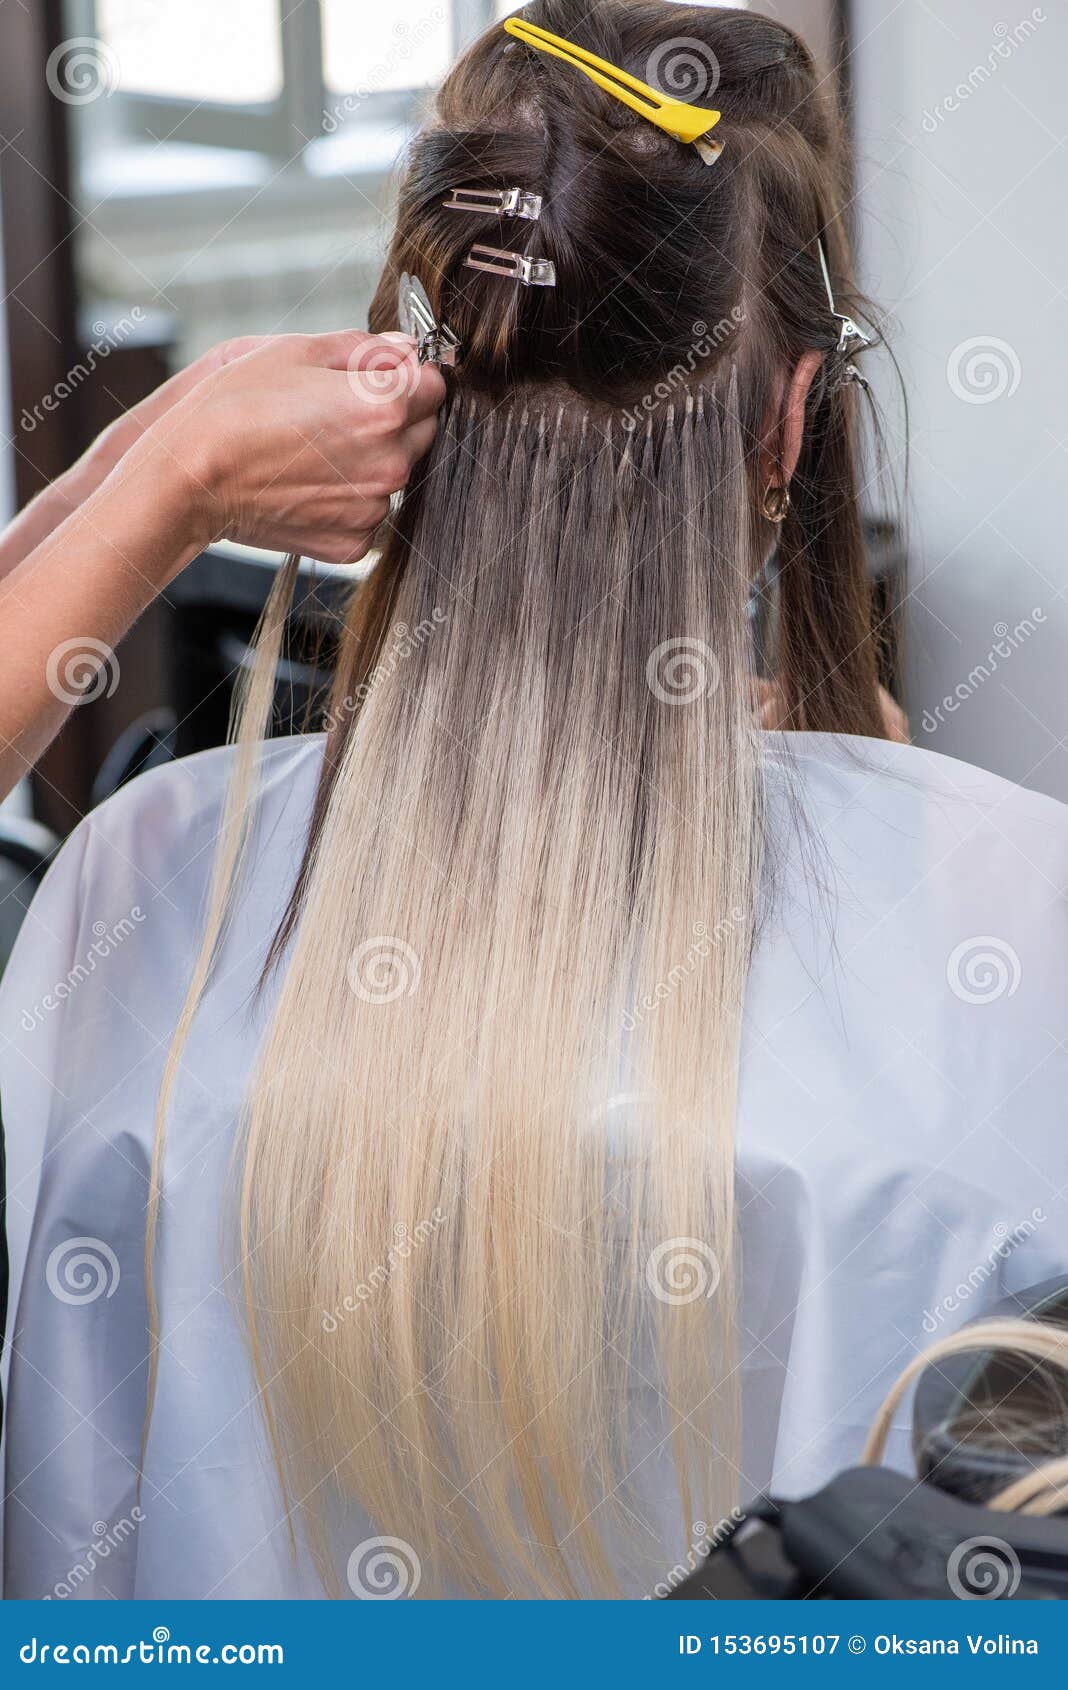 Premium Photo  Hair extension process of a young woman in a beauty salon  closeup vertical photography